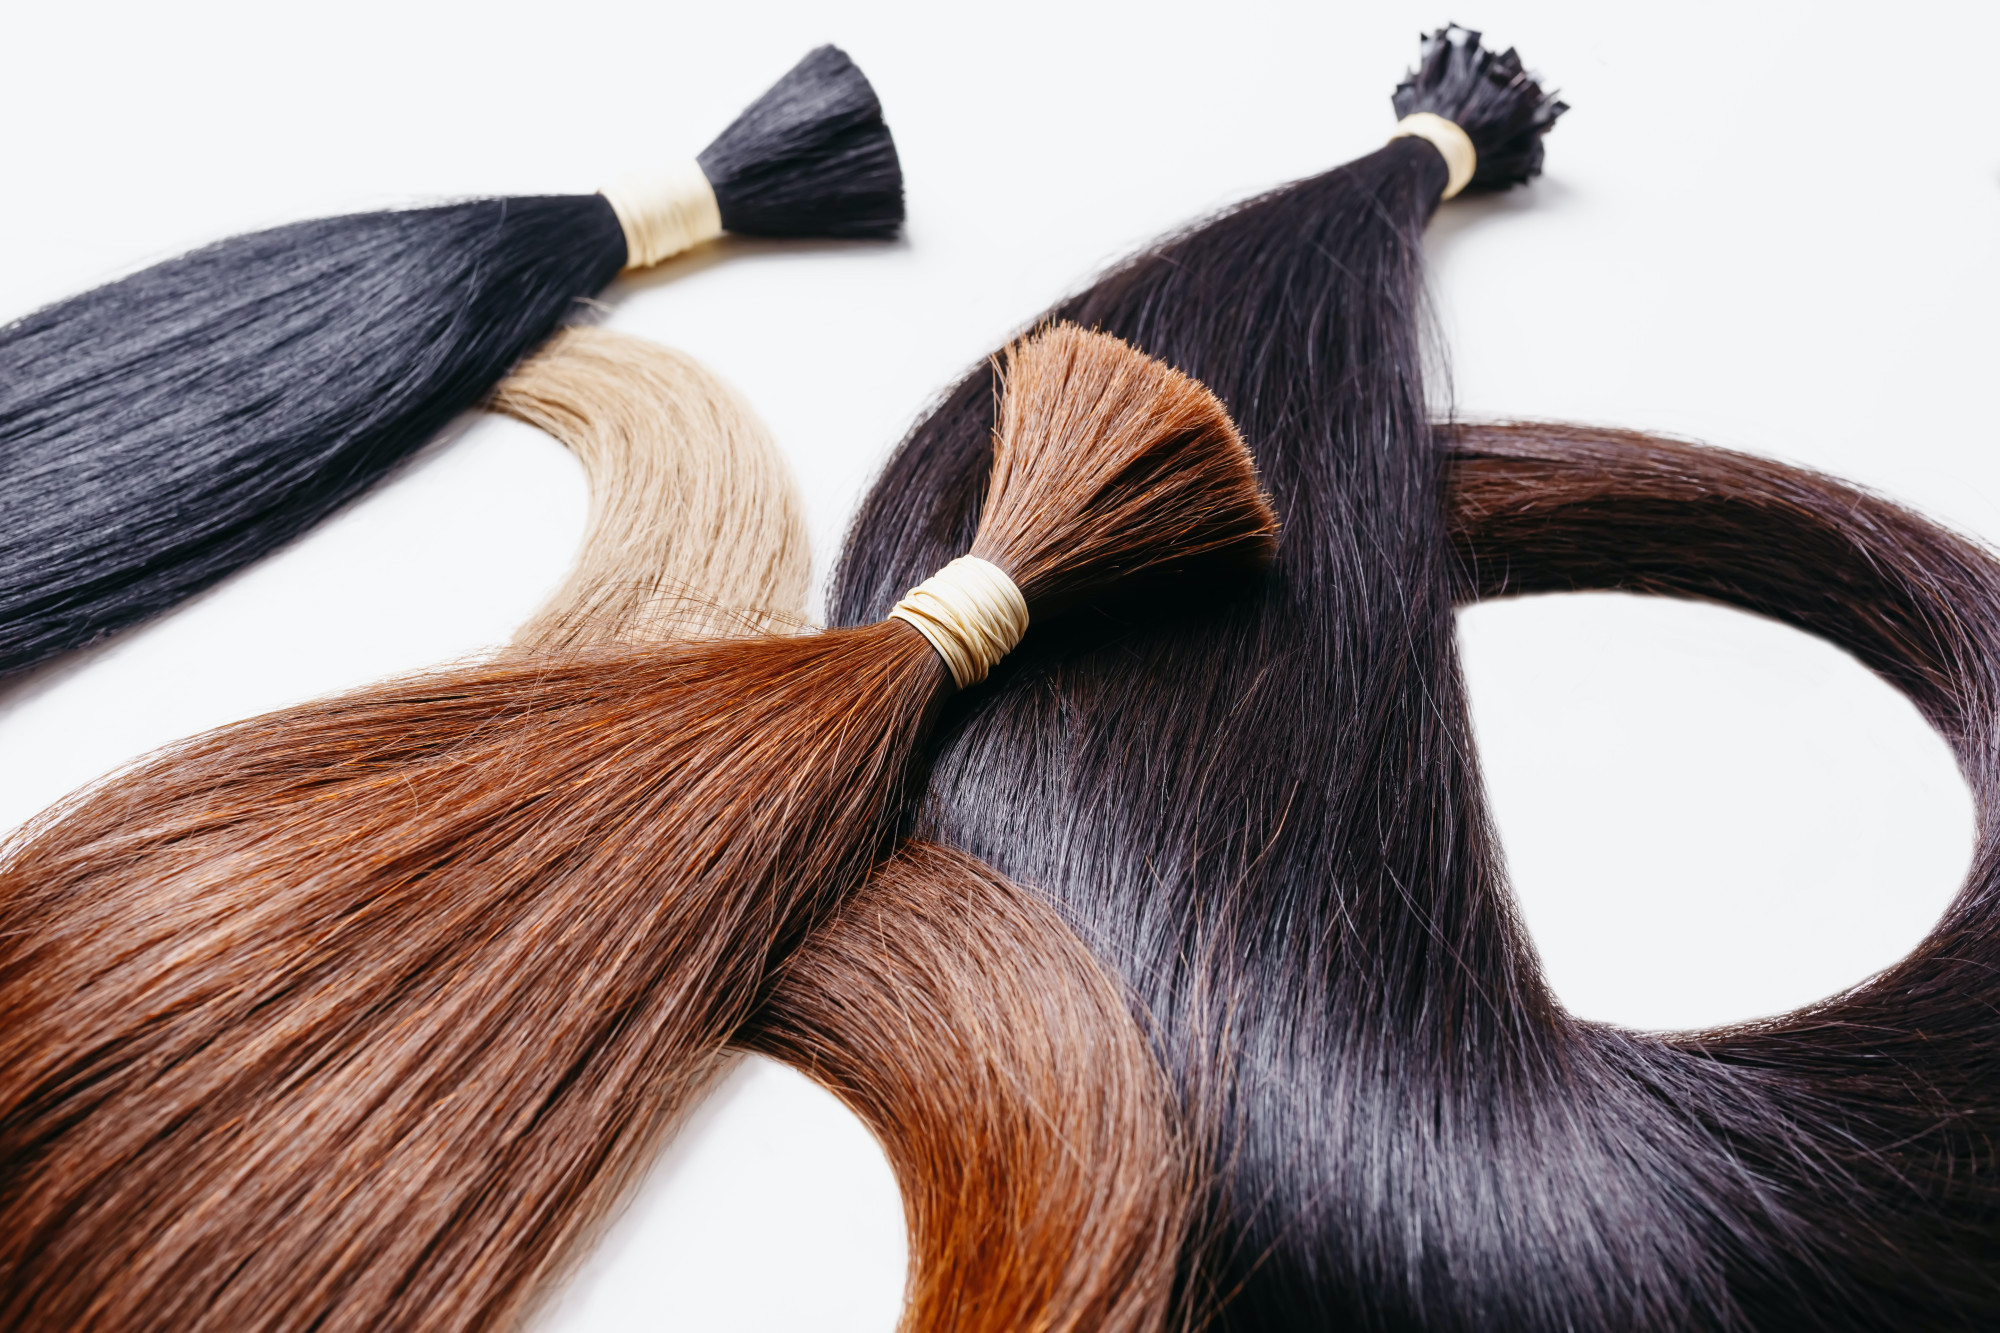 6 Common Hair Extension Mistakes and How to Avoid Them